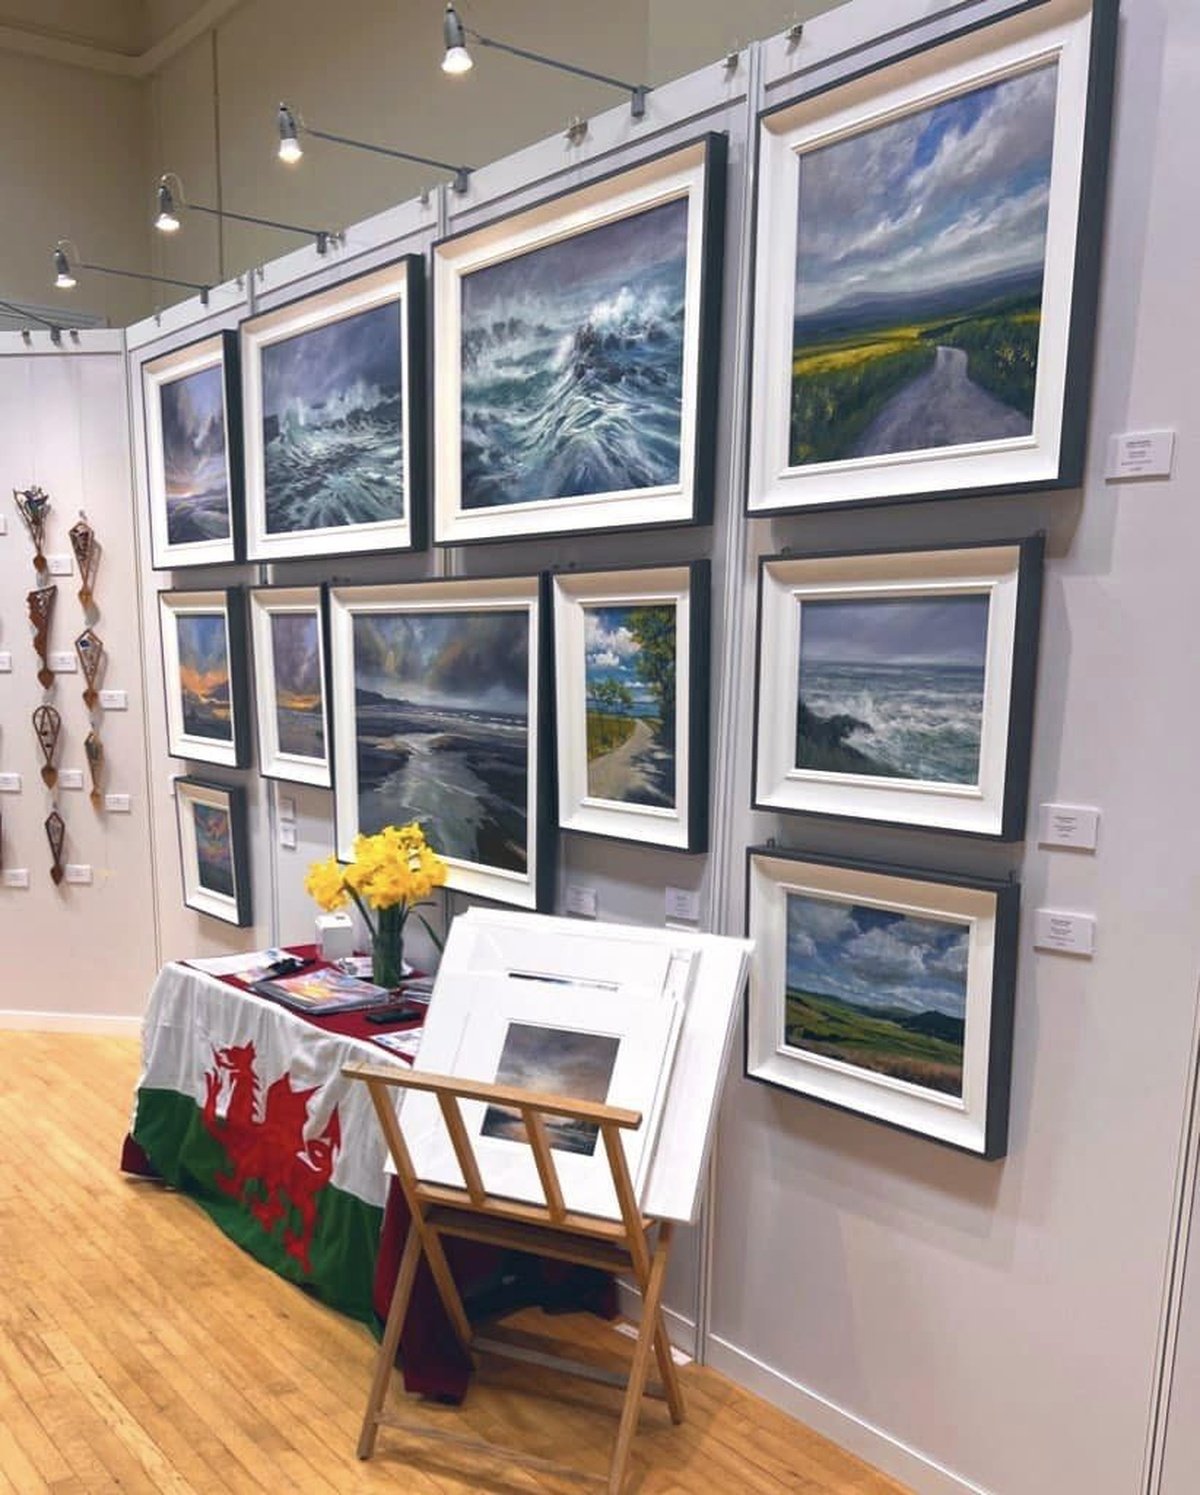 Photos from the Exhibition of Contemporary Welsh Art 2023